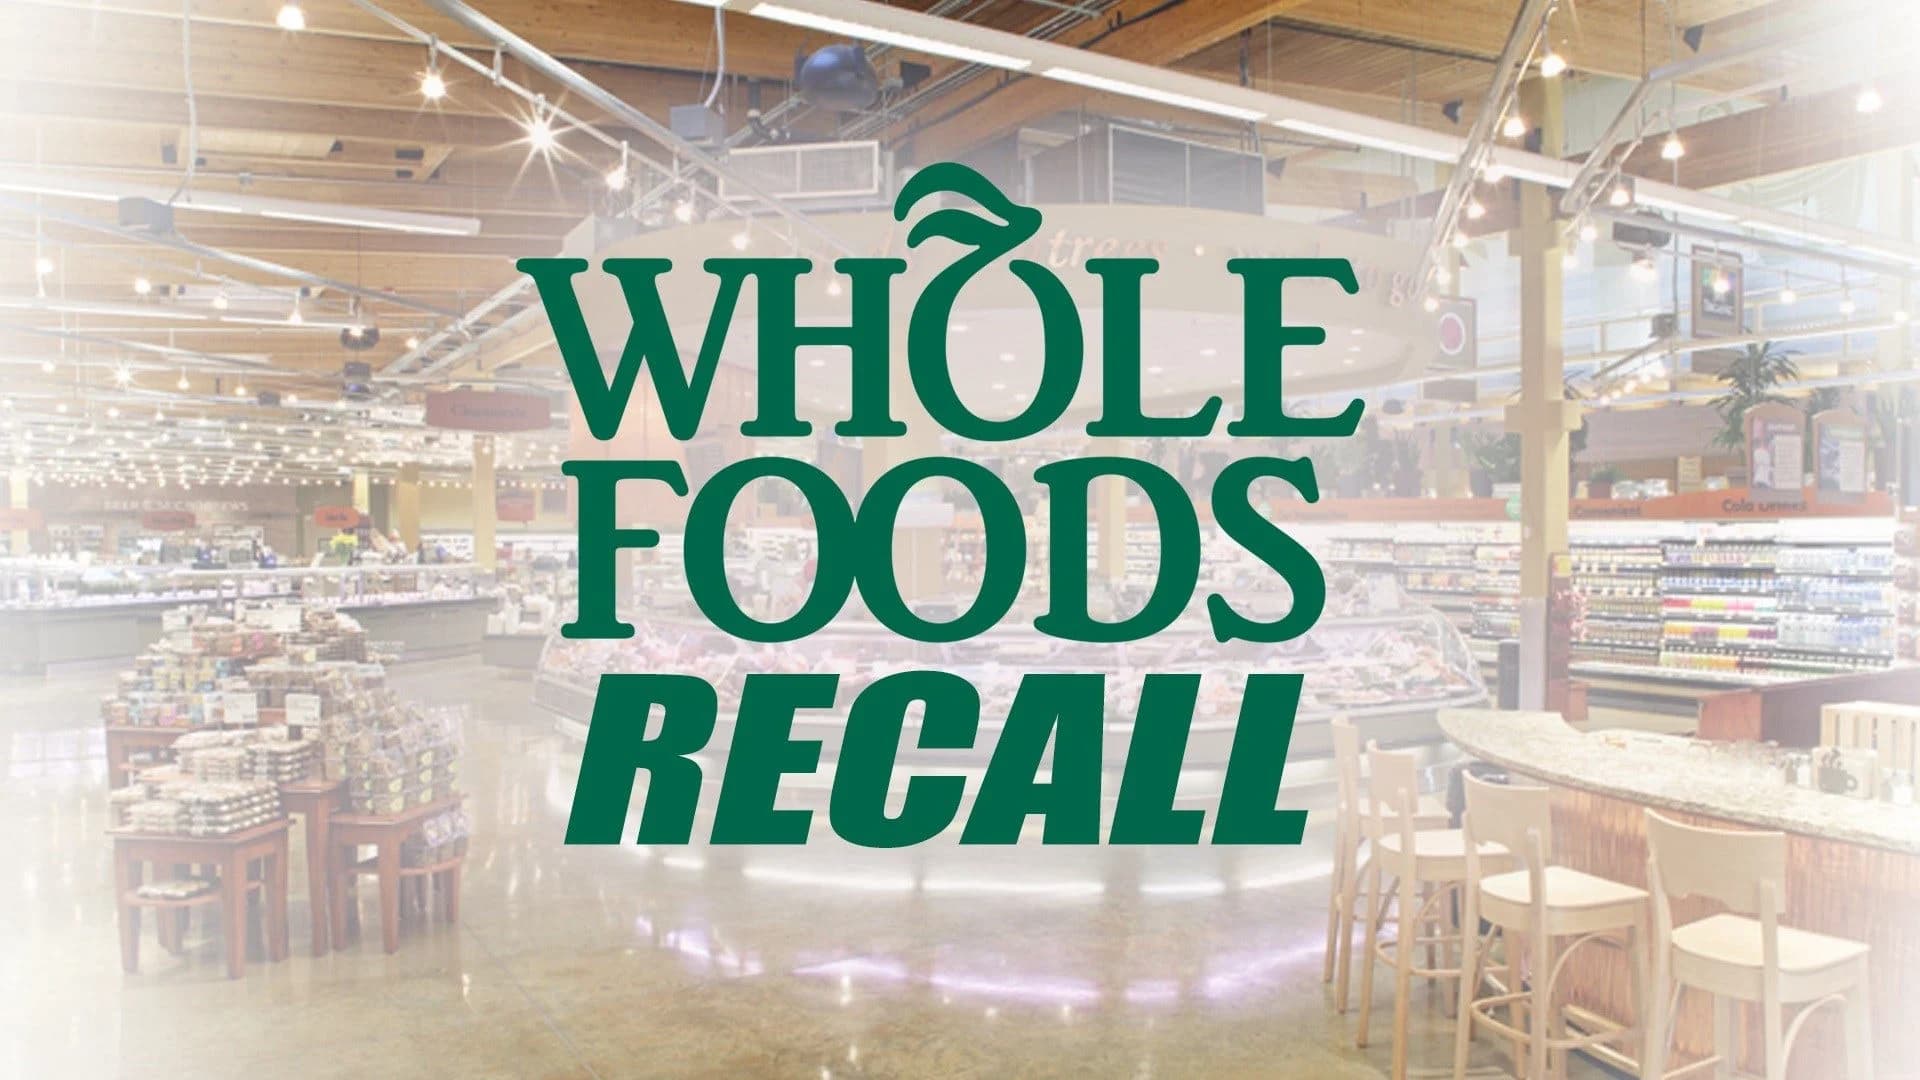 Whole Foods recalls prepared foods over possible salmonella contamination